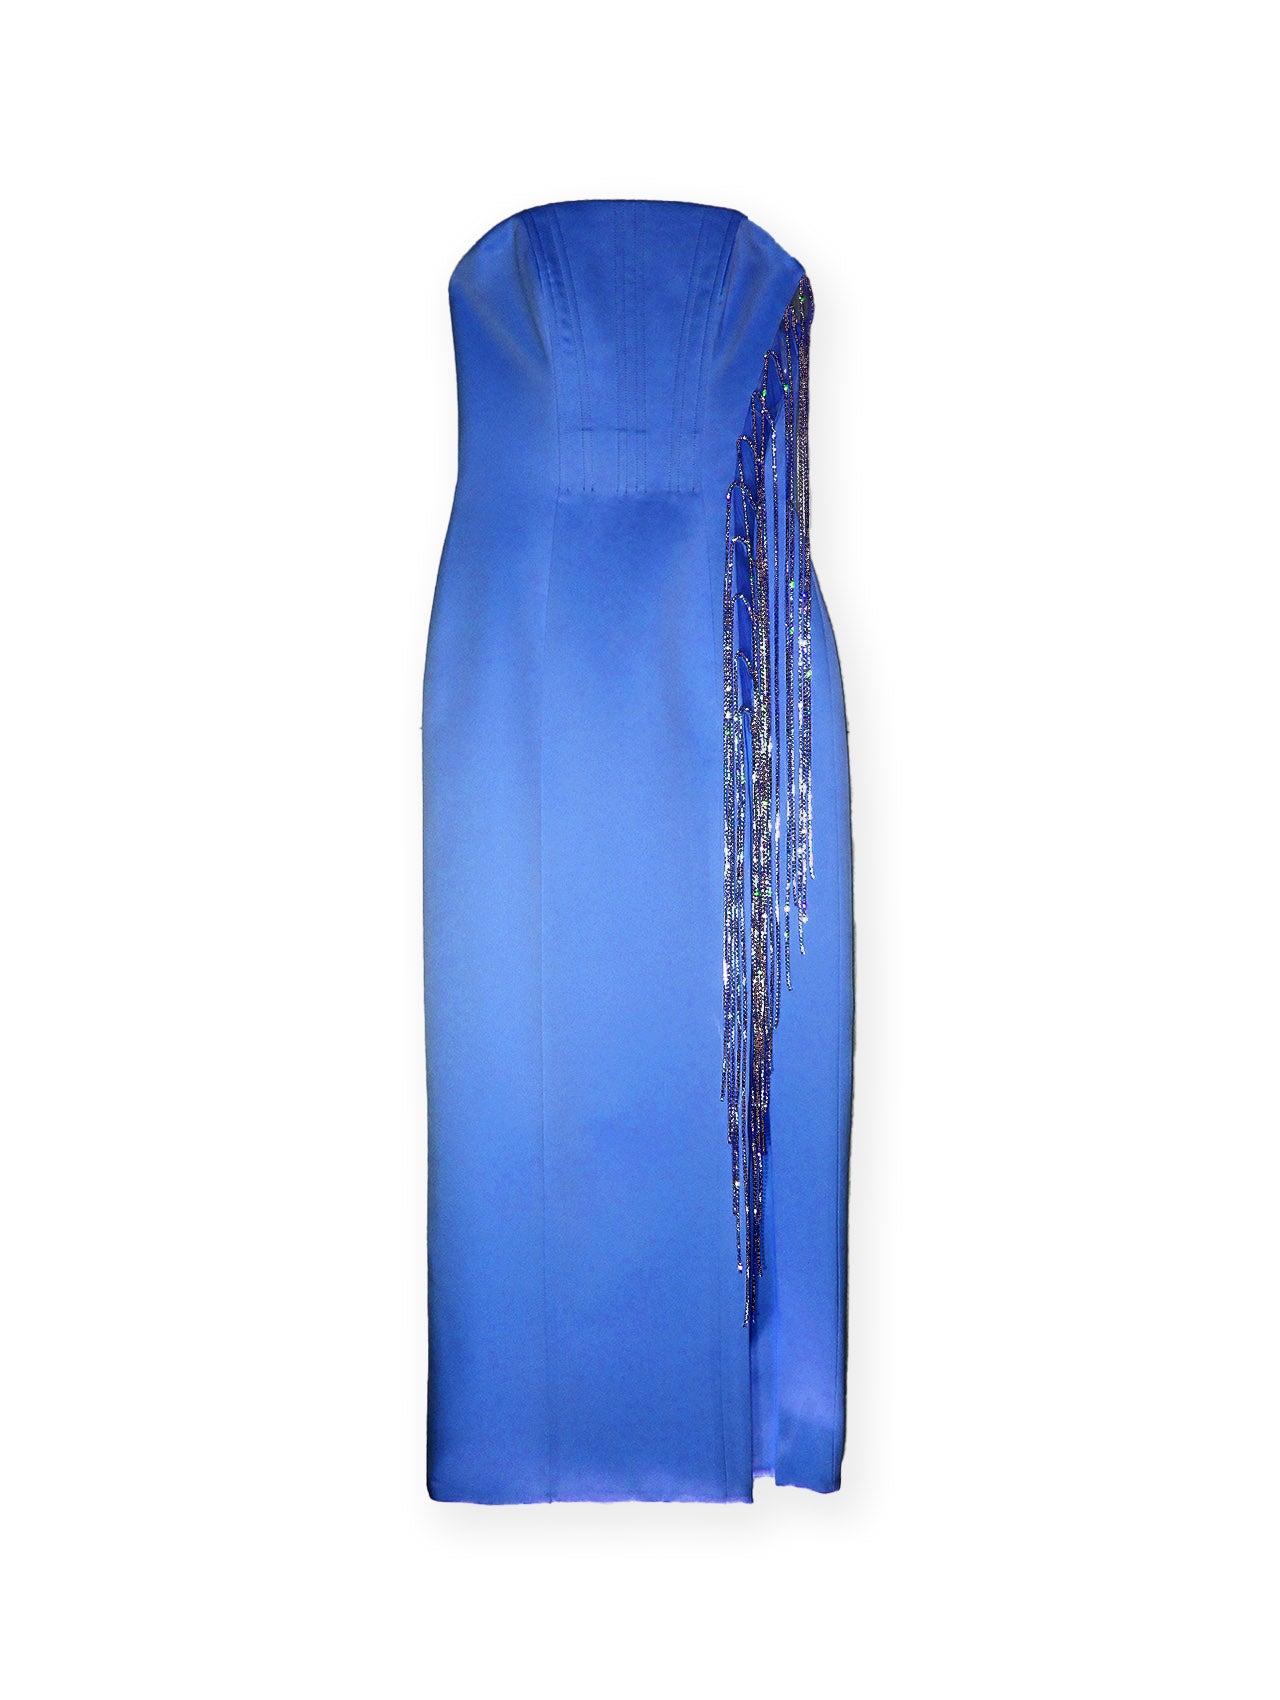 BLOOM MIDI DRESS | ELECTRIC BLUE; the perfect combination of classic elegance and modern style. This strapless design features a side split and crystal chain fringing for a tasteful touch of shimmer. It also includes corset boning for structure and support, offering a comfortable midi length fit.